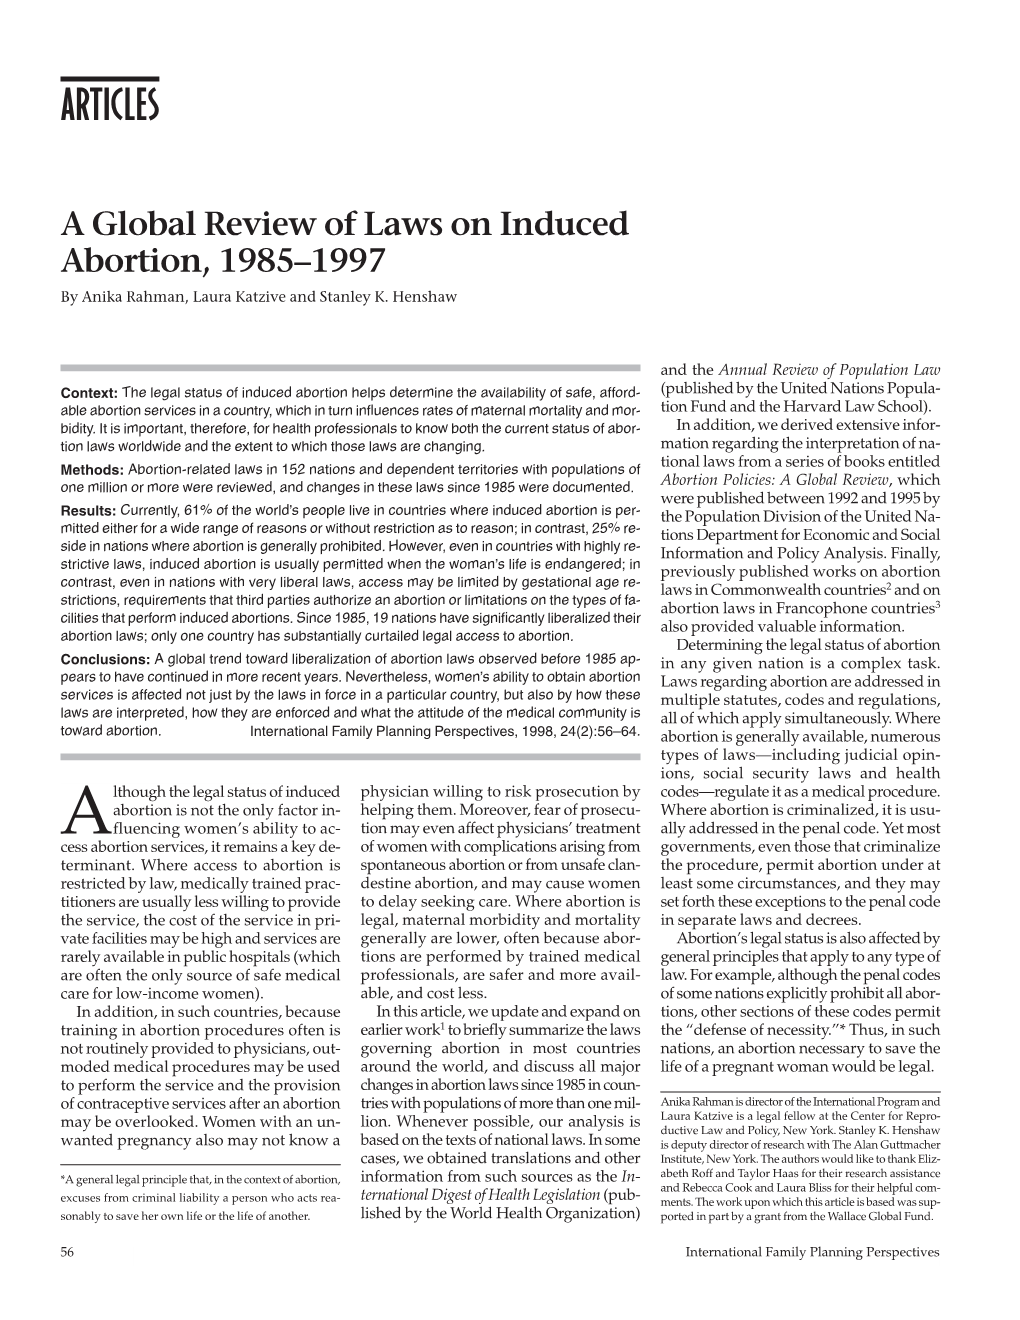 A Global Review of Laws on Induced Abortion, 1985–1997 by Anika Rahman, Laura Katzive and Stanley K